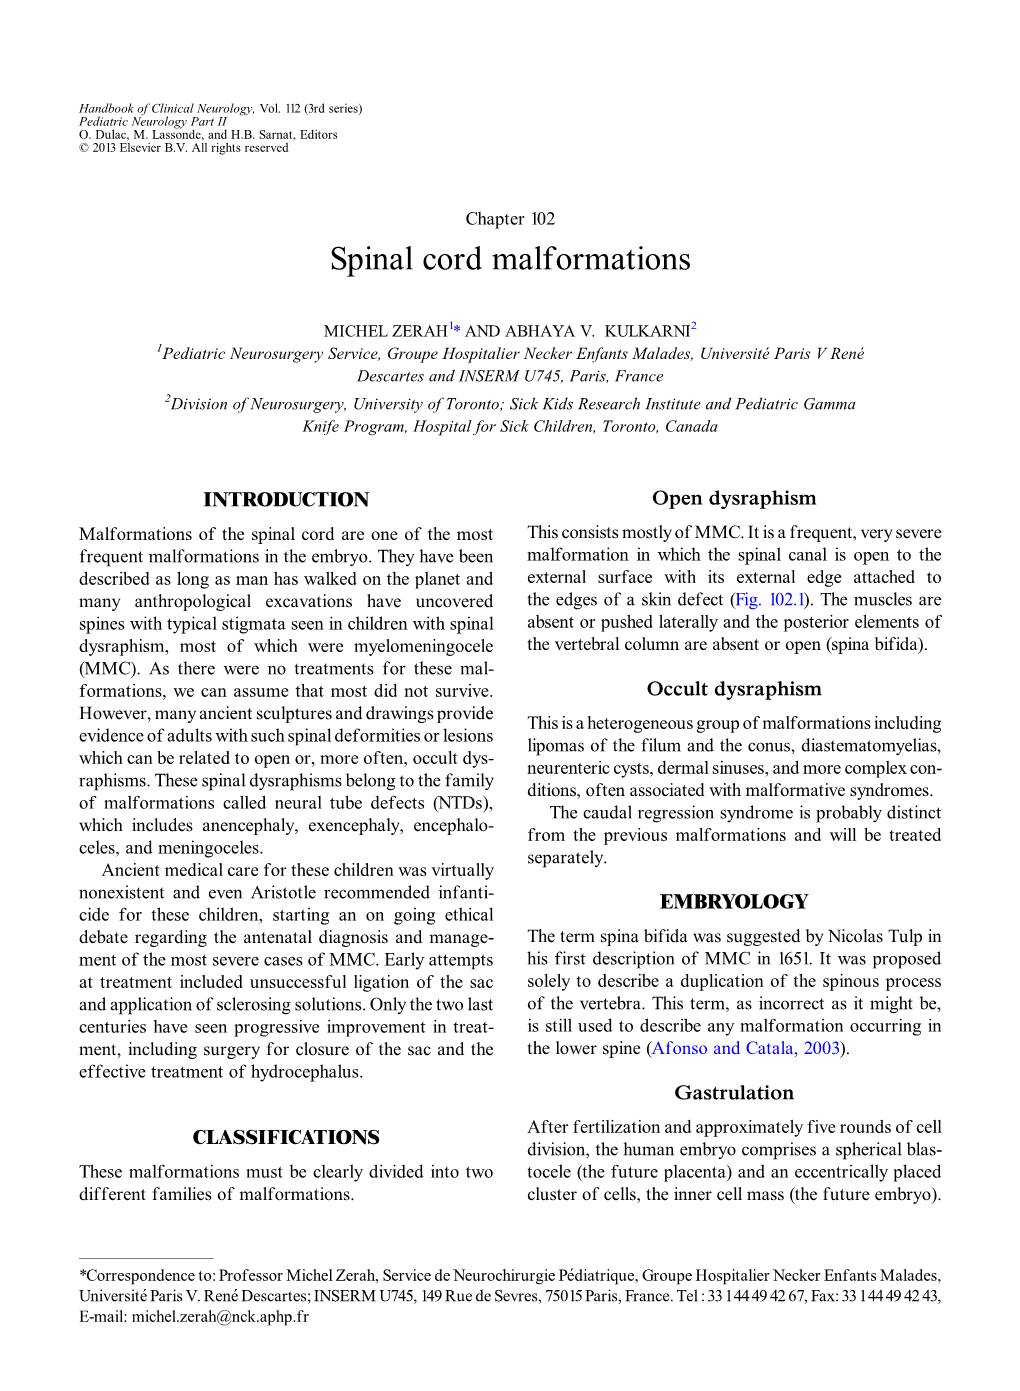 Spinal Cord Malformations